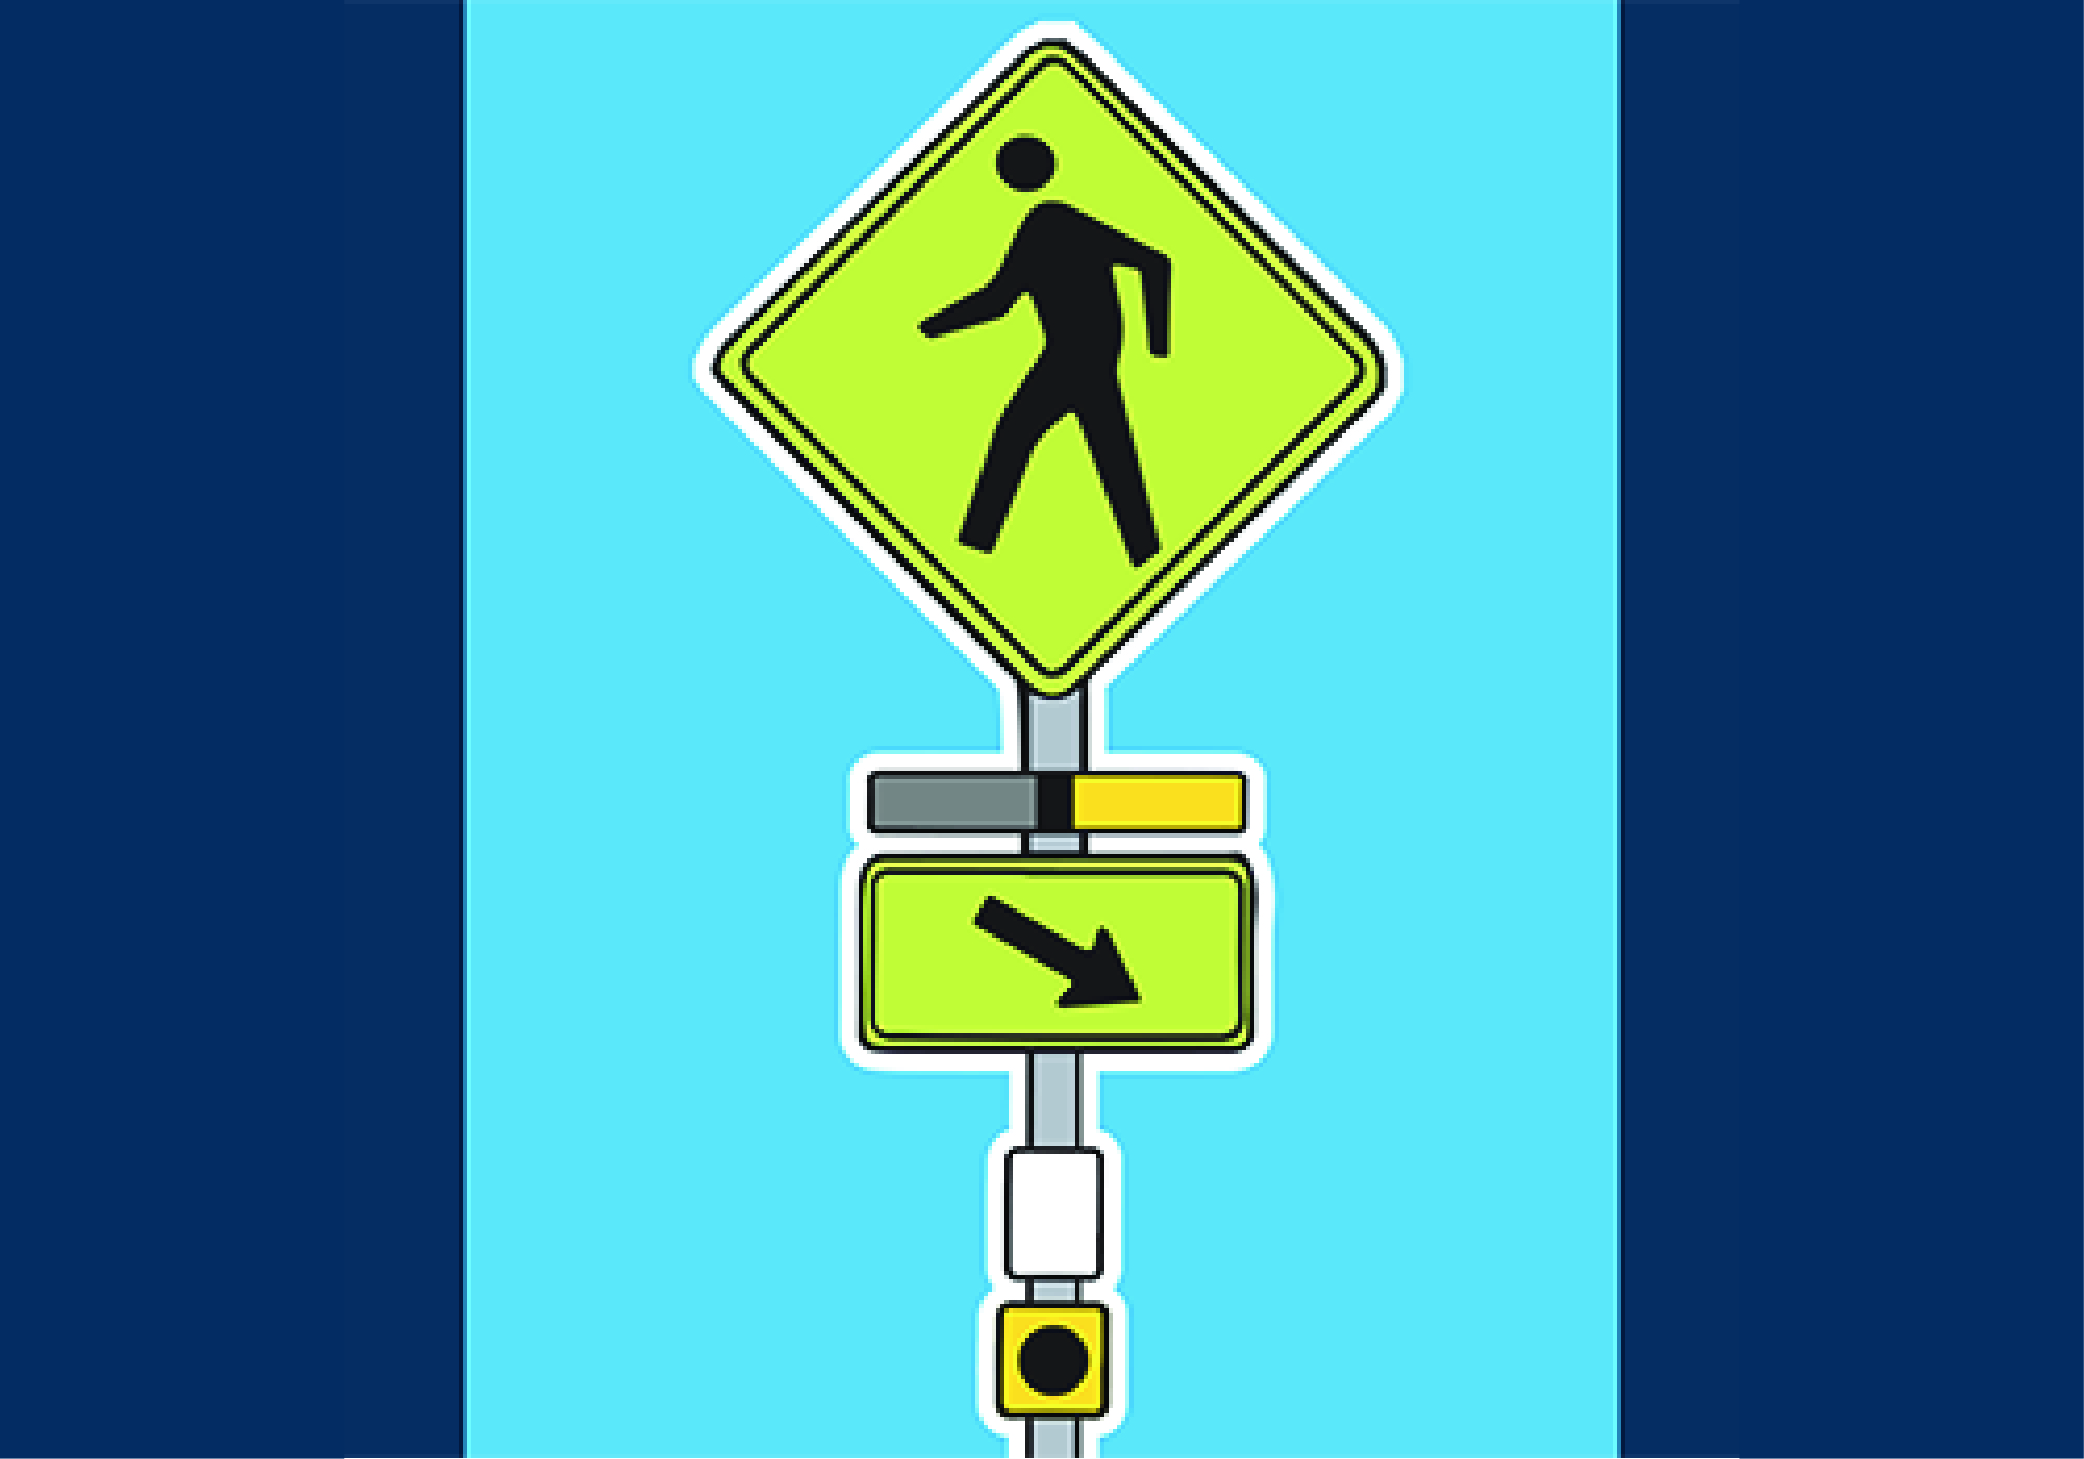 Rendering of a pedestrian crossing road sign with lights and a push-button